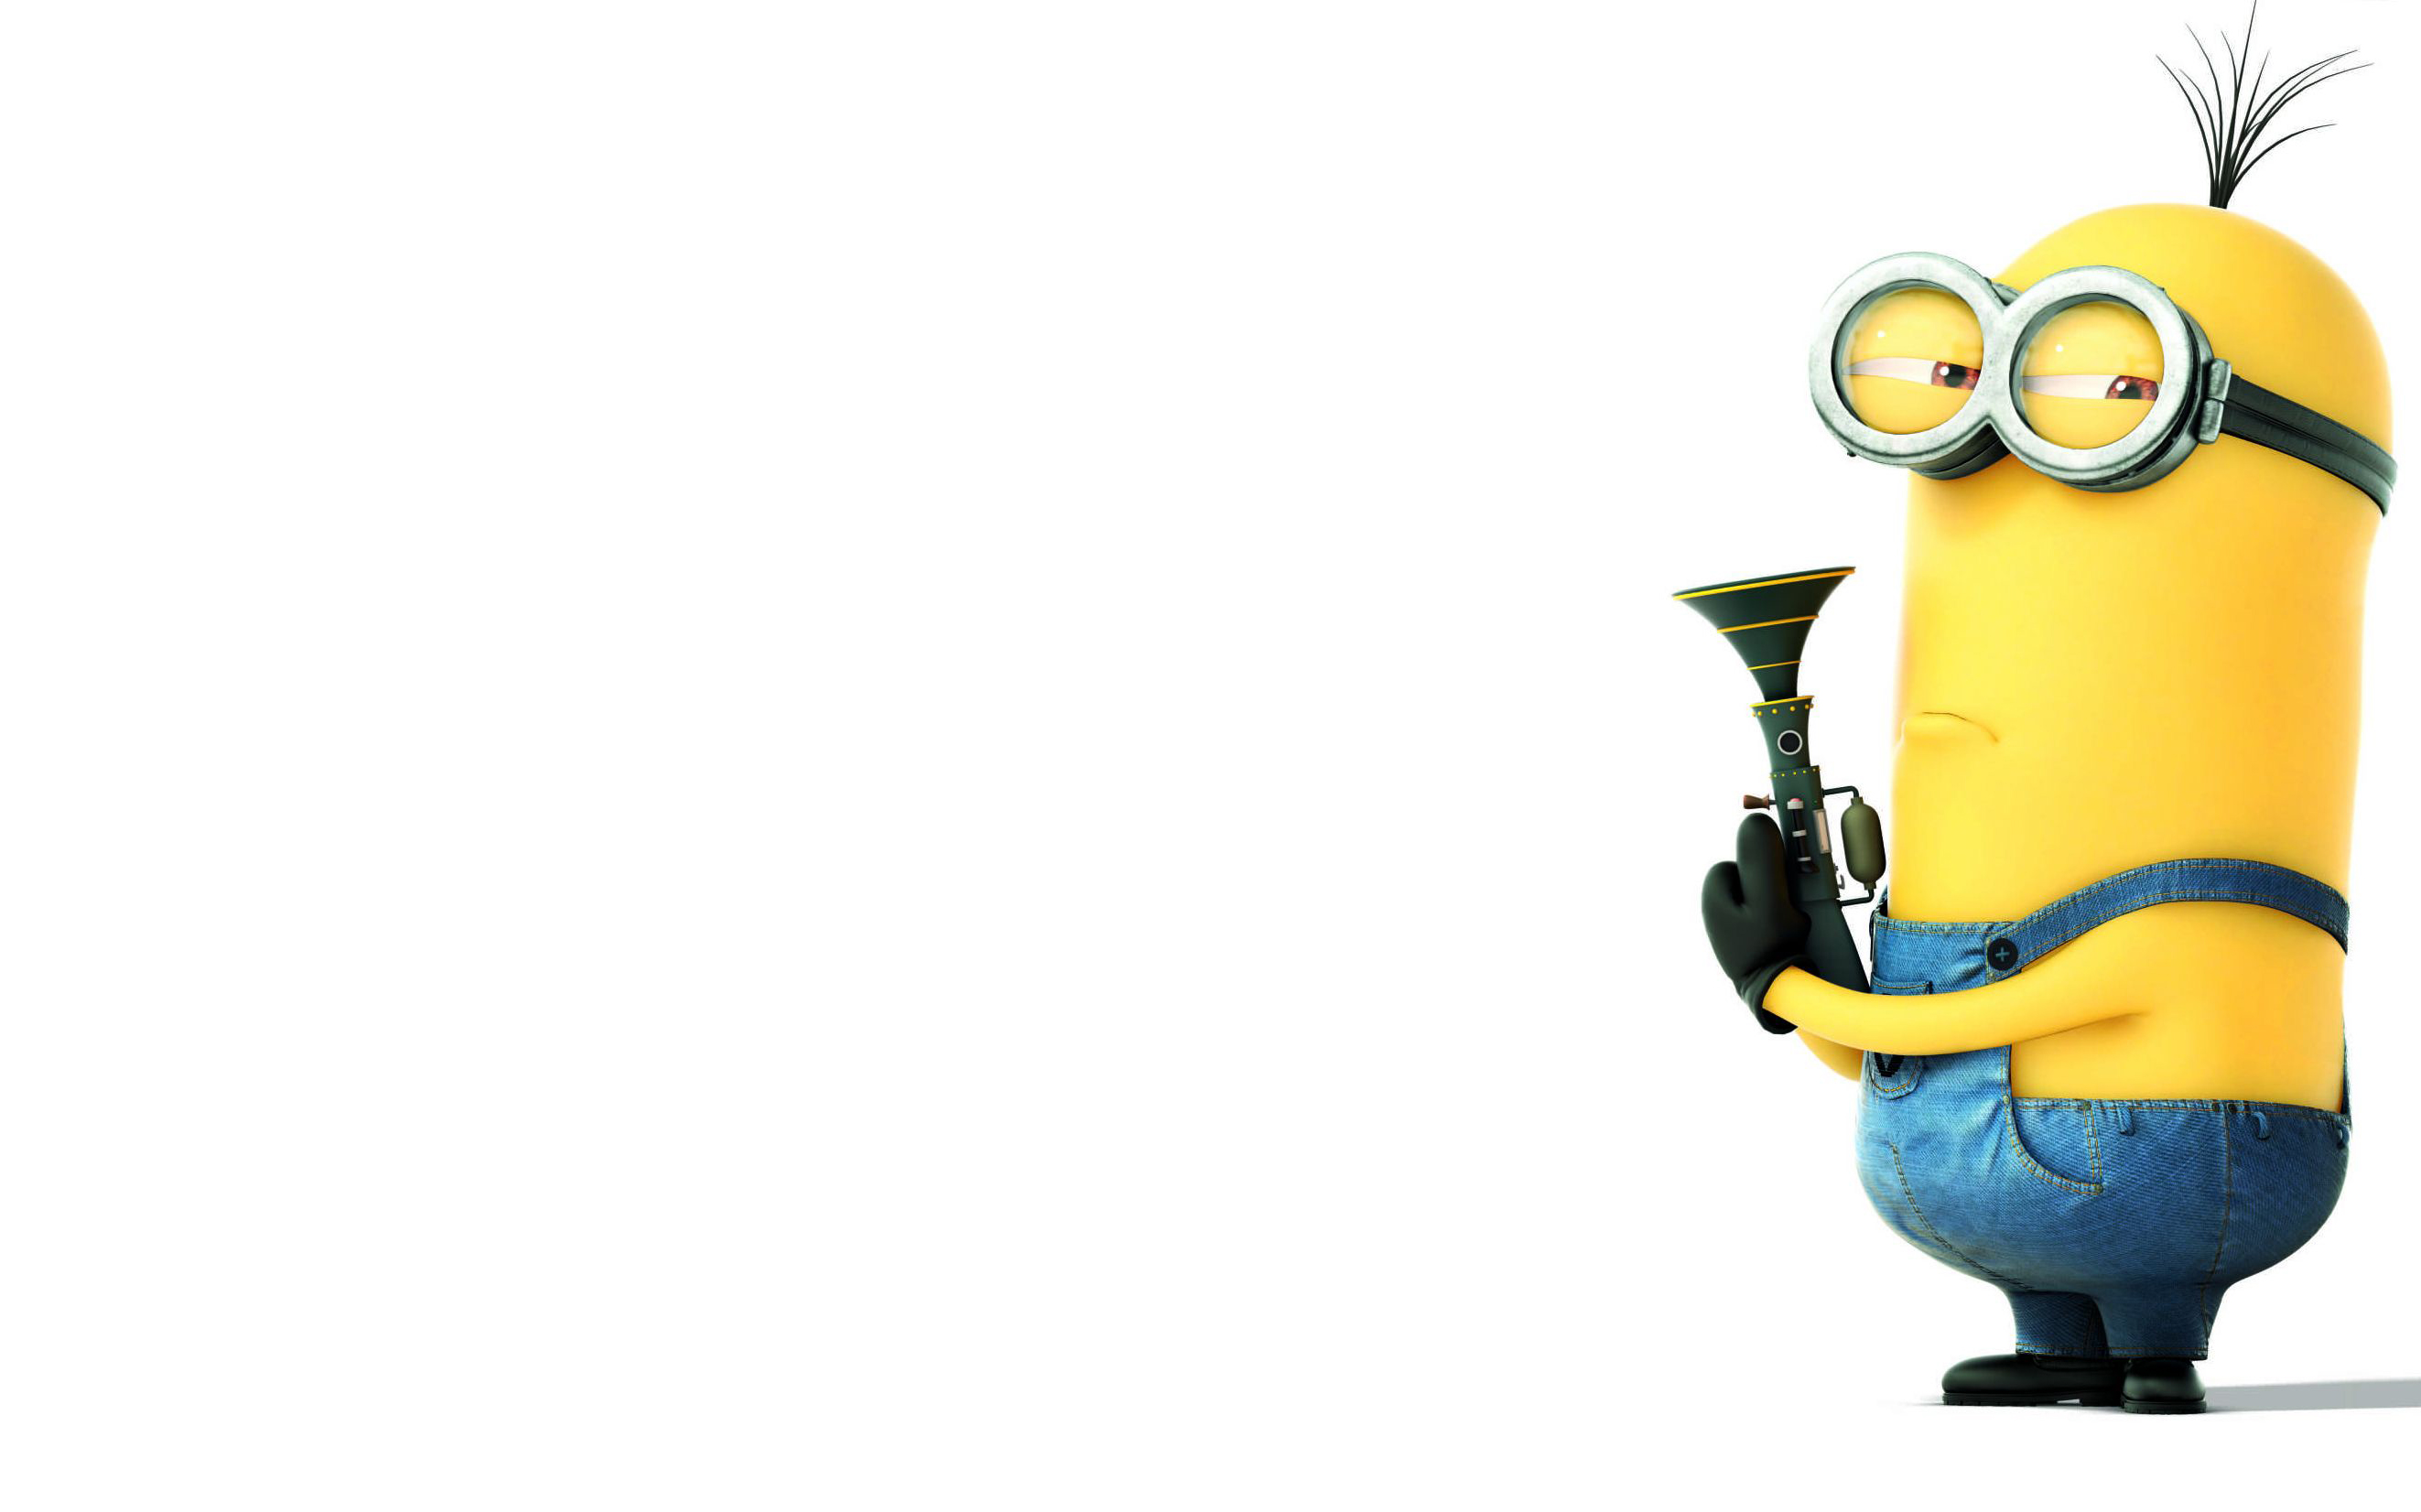 Download Despicable Me 2 Minions Cute Wallpapers pictures in high